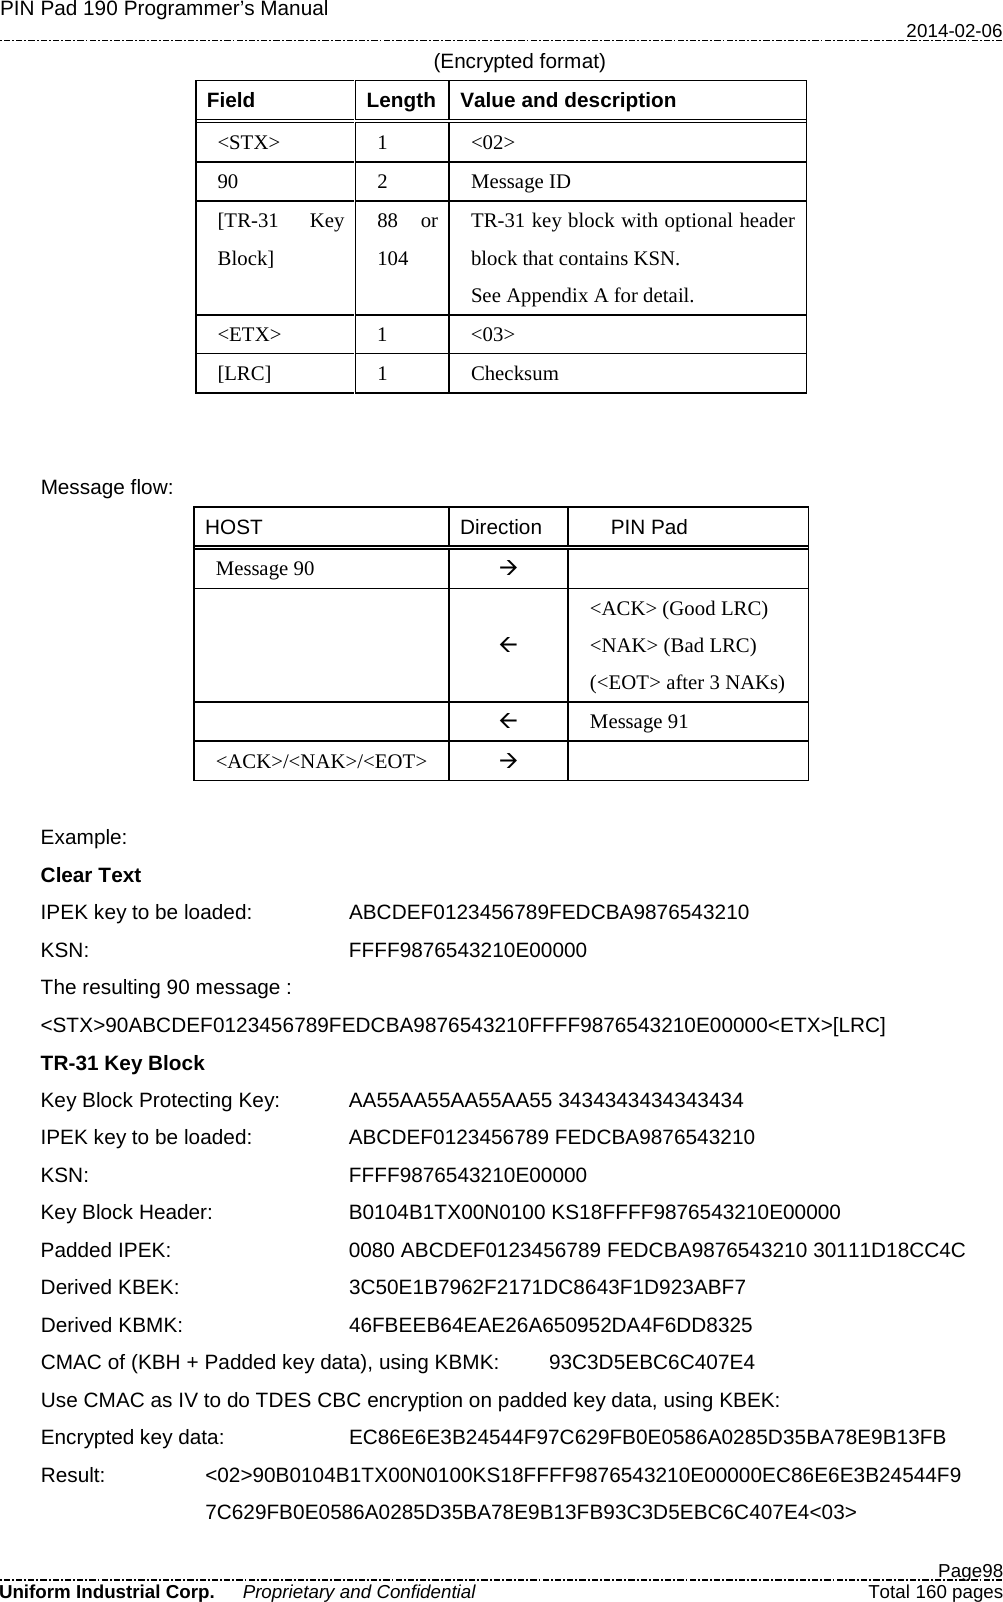 PIN Pad 190 Programmer’s Manual   2014-02-06  Page98 Uniform Industrial Corp. Proprietary and Confidential  Total 160 pages (Encrypted format) Field  Length  Value and description &lt;STX&gt;  1  &lt;02&gt; 90  2  Message ID [TR-31 Key Block] 88 or 104 TR-31 key block with optional header block that contains KSN. See Appendix A for detail. &lt;ETX&gt;  1  &lt;03&gt; [LRC]  1  Checksum   Message flow: HOST Direction    PIN Pad Message 90     &lt;ACK&gt; (Good LRC) &lt;NAK&gt; (Bad LRC) (&lt;EOT&gt; after 3 NAKs)   Message 91 &lt;ACK&gt;/&lt;NAK&gt;/&lt;EOT&gt;    Example:   Clear Text IPEK key to be loaded:    ABCDEF0123456789FEDCBA9876543210 KSN:        FFFF9876543210E00000 The resulting 90 message :  &lt;STX&gt;90ABCDEF0123456789FEDCBA9876543210FFFF9876543210E00000&lt;ETX&gt;[LRC] TR-31 Key Block Key Block Protecting Key:    AA55AA55AA55AA55 3434343434343434 IPEK key to be loaded:    ABCDEF0123456789 FEDCBA9876543210 KSN:        FFFF9876543210E00000 Key Block Header:   B0104B1TX00N0100 KS18FFFF9876543210E00000 Padded IPEK:        0080 ABCDEF0123456789 FEDCBA9876543210 30111D18CC4C Derived KBEK:        3C50E1B7962F2171DC8643F1D923ABF7 Derived KBMK:        46FBEEB64EAE26A650952DA4F6DD8325 CMAC of (KBH + Padded key data), using KBMK: 93C3D5EBC6C407E4 Use CMAC as IV to do TDES CBC encryption on padded key data, using KBEK: Encrypted key data:   EC86E6E3B24544F97C629FB0E0586A0285D35BA78E9B13FB Result: &lt;02&gt;90B0104B1TX00N0100KS18FFFF9876543210E00000EC86E6E3B24544F9 7C629FB0E0586A0285D35BA78E9B13FB93C3D5EBC6C407E4&lt;03&gt; 